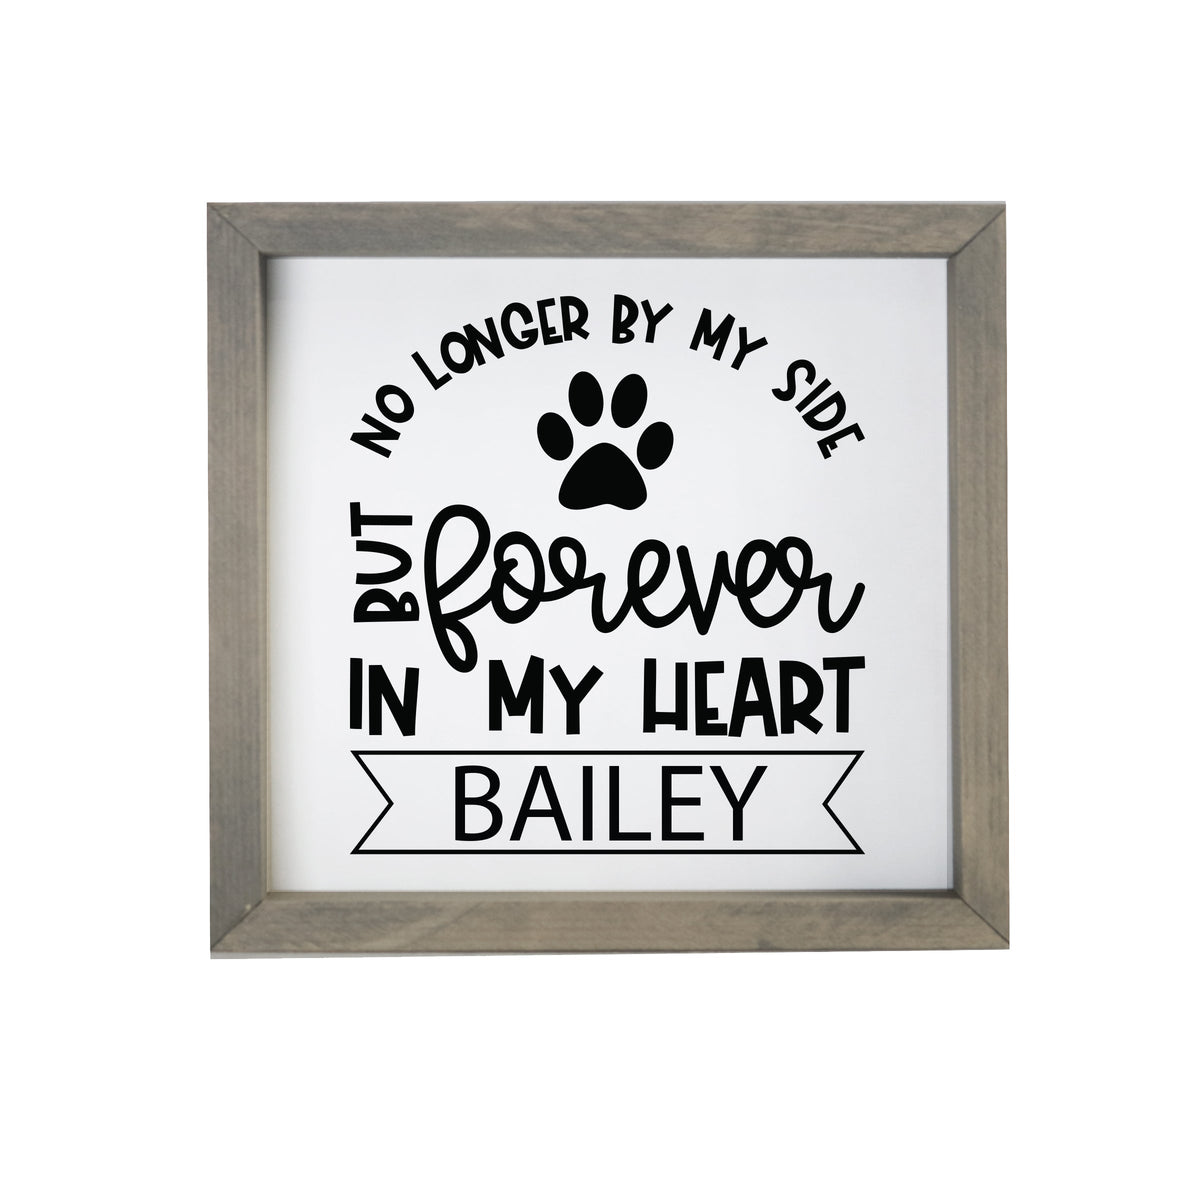 11.5x11.5 Grey Framed Pet Memorial Shadow Box with phrase &quot;No Longer By My Side&quot;